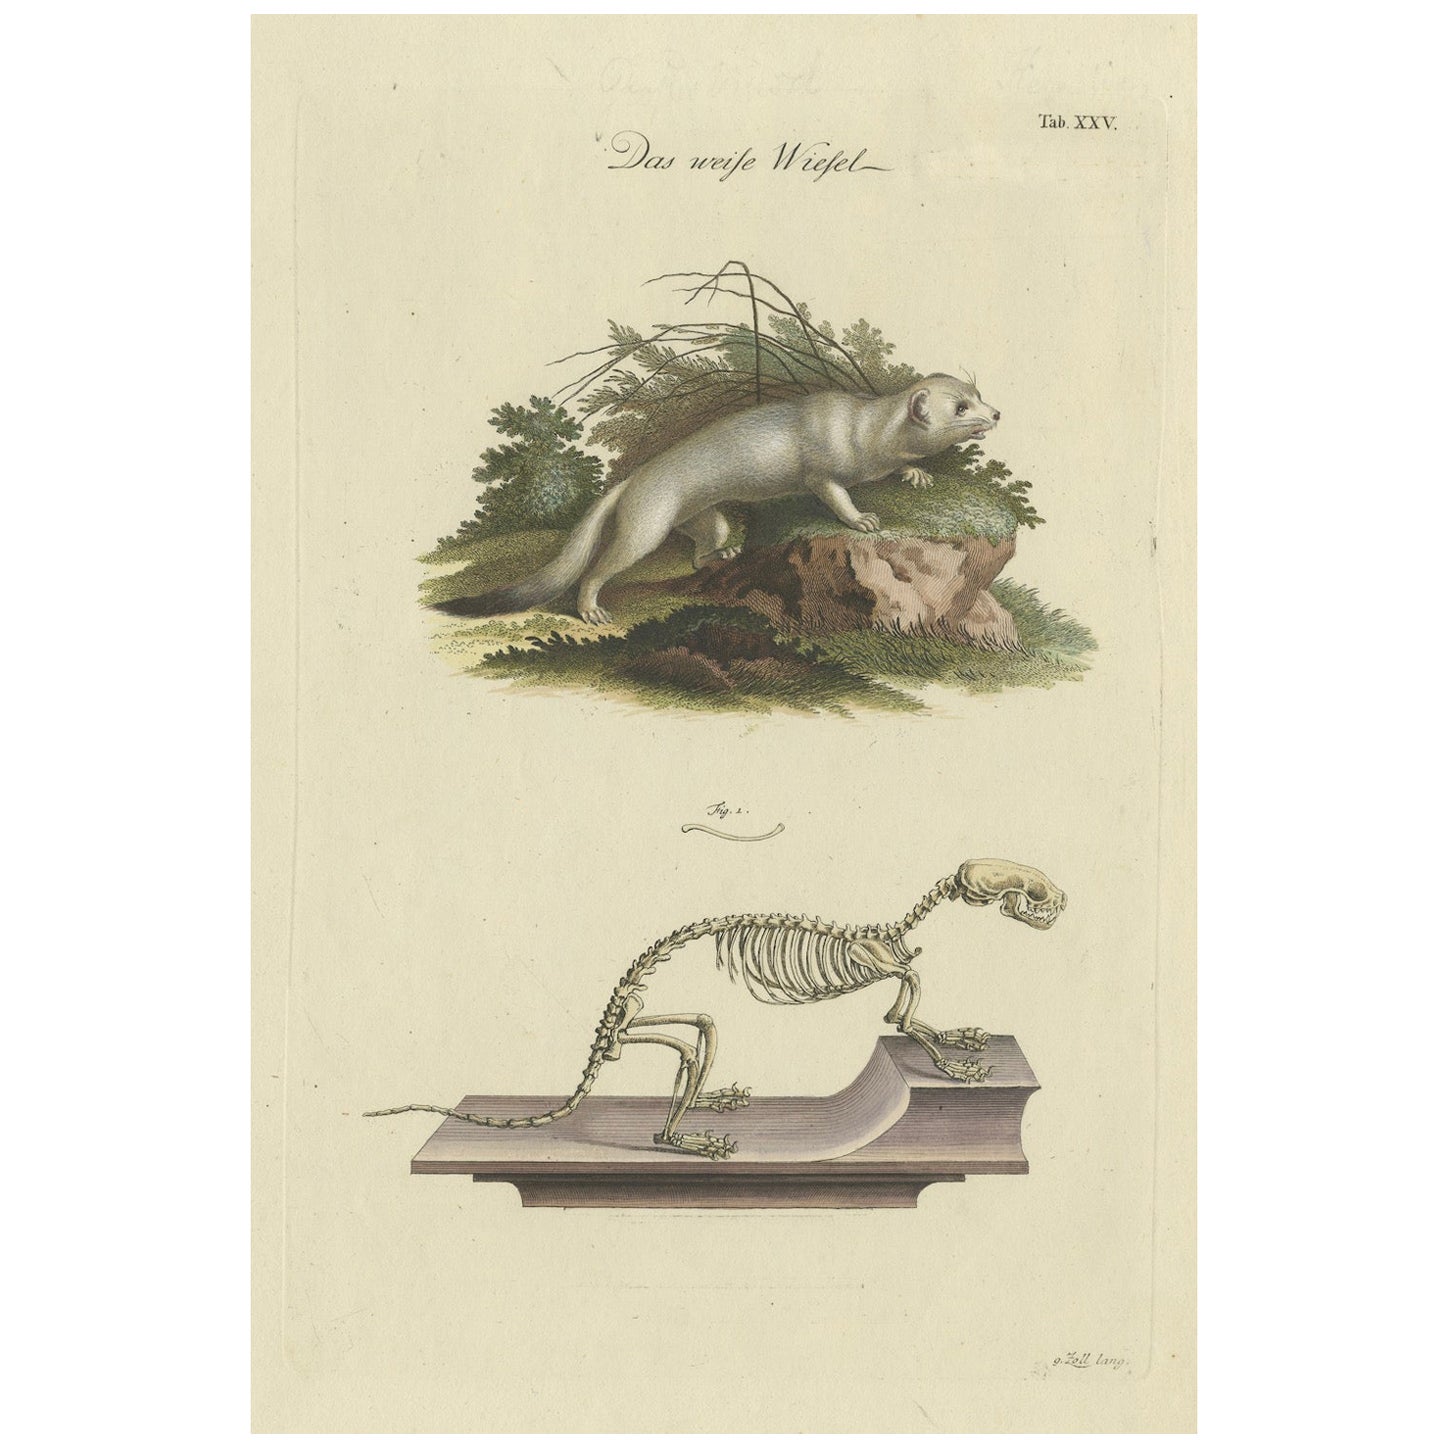 Antique Zoological Study: Weasel Anatomy, 18th Century Handcolored Print, c.1750